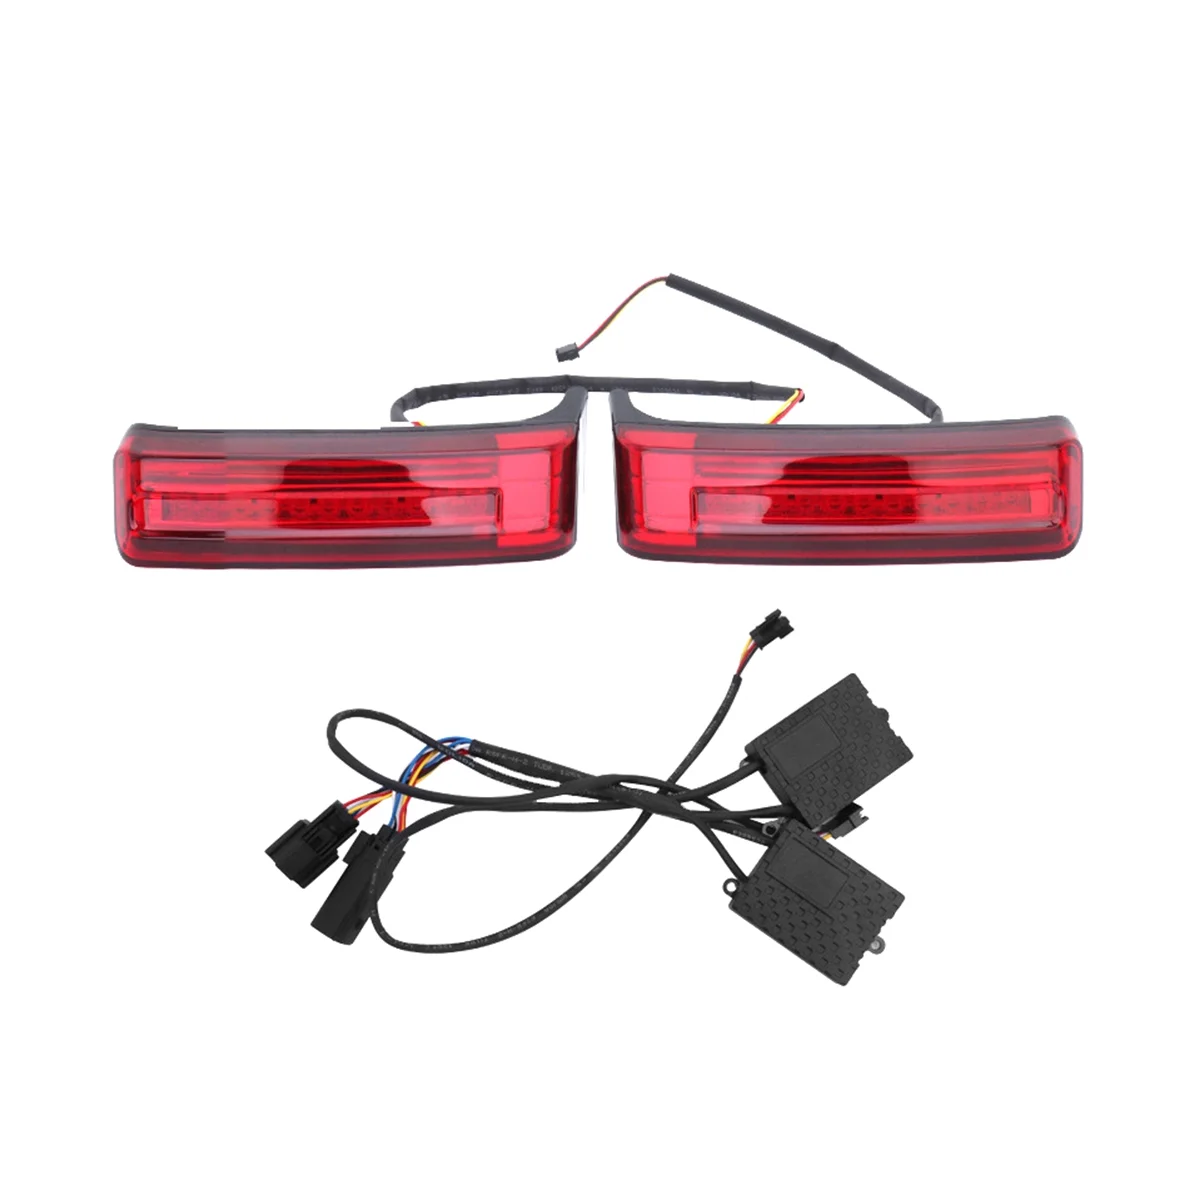 

For Harley Motorcycle Big Glide Conversion Side Box Tail Light Travel Box Side Light 97-22 Years Black Red